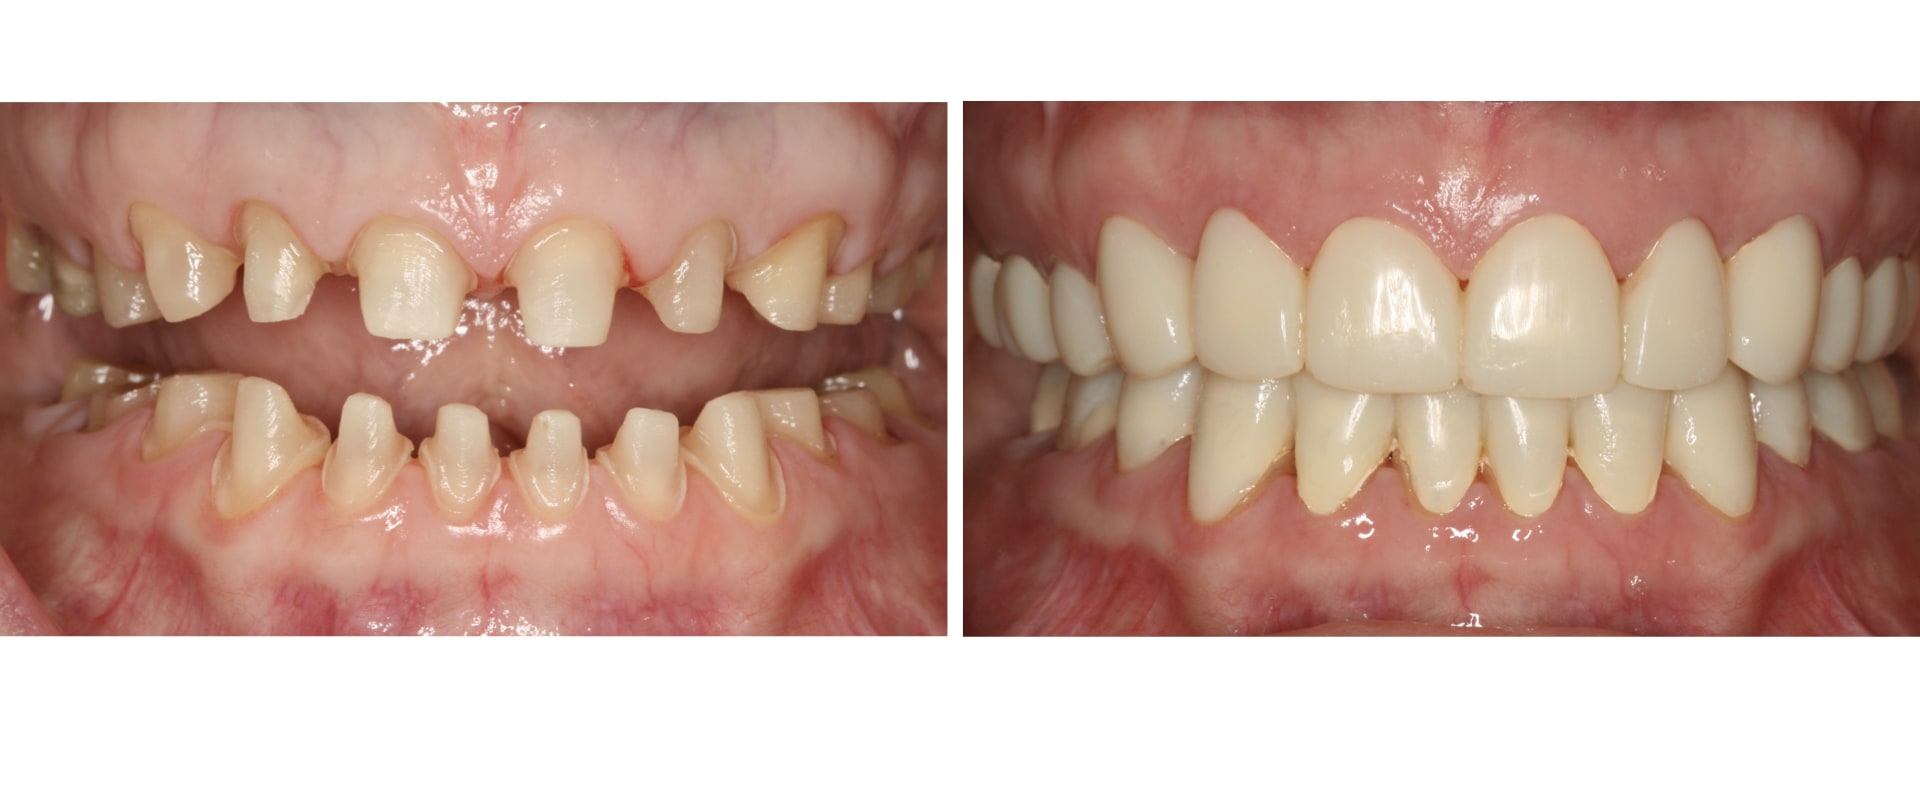 Is it hard to become a prosthodontist?